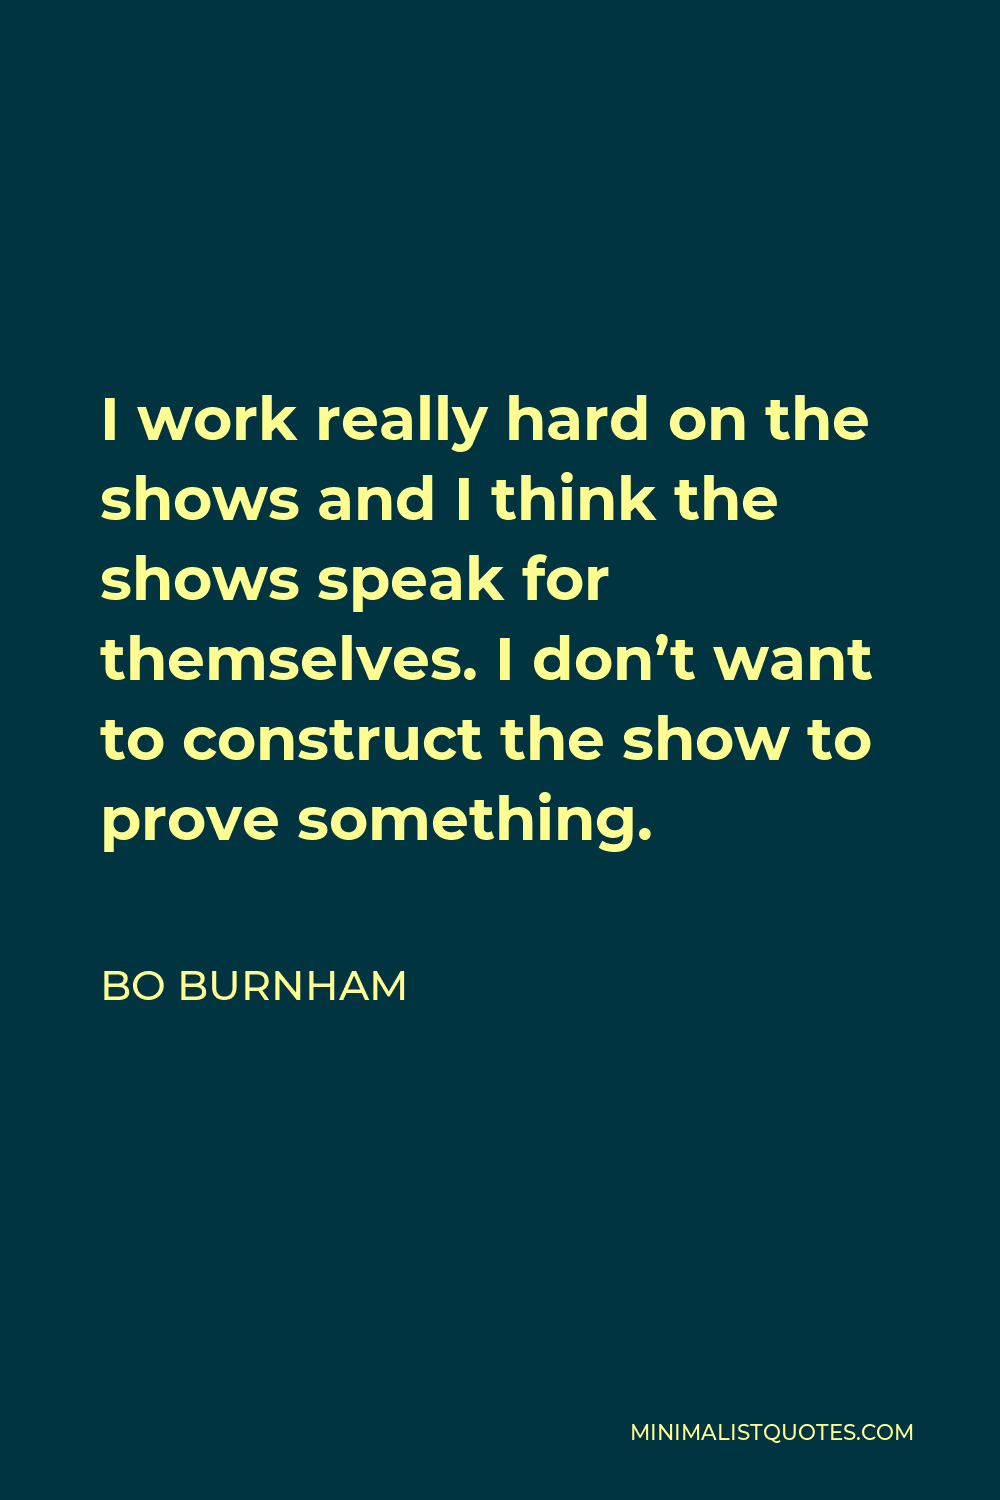 Bo Burnham Quote - I work really hard on the shows and I think the shows speak for themselves. I don’t want to construct the show to prove something.